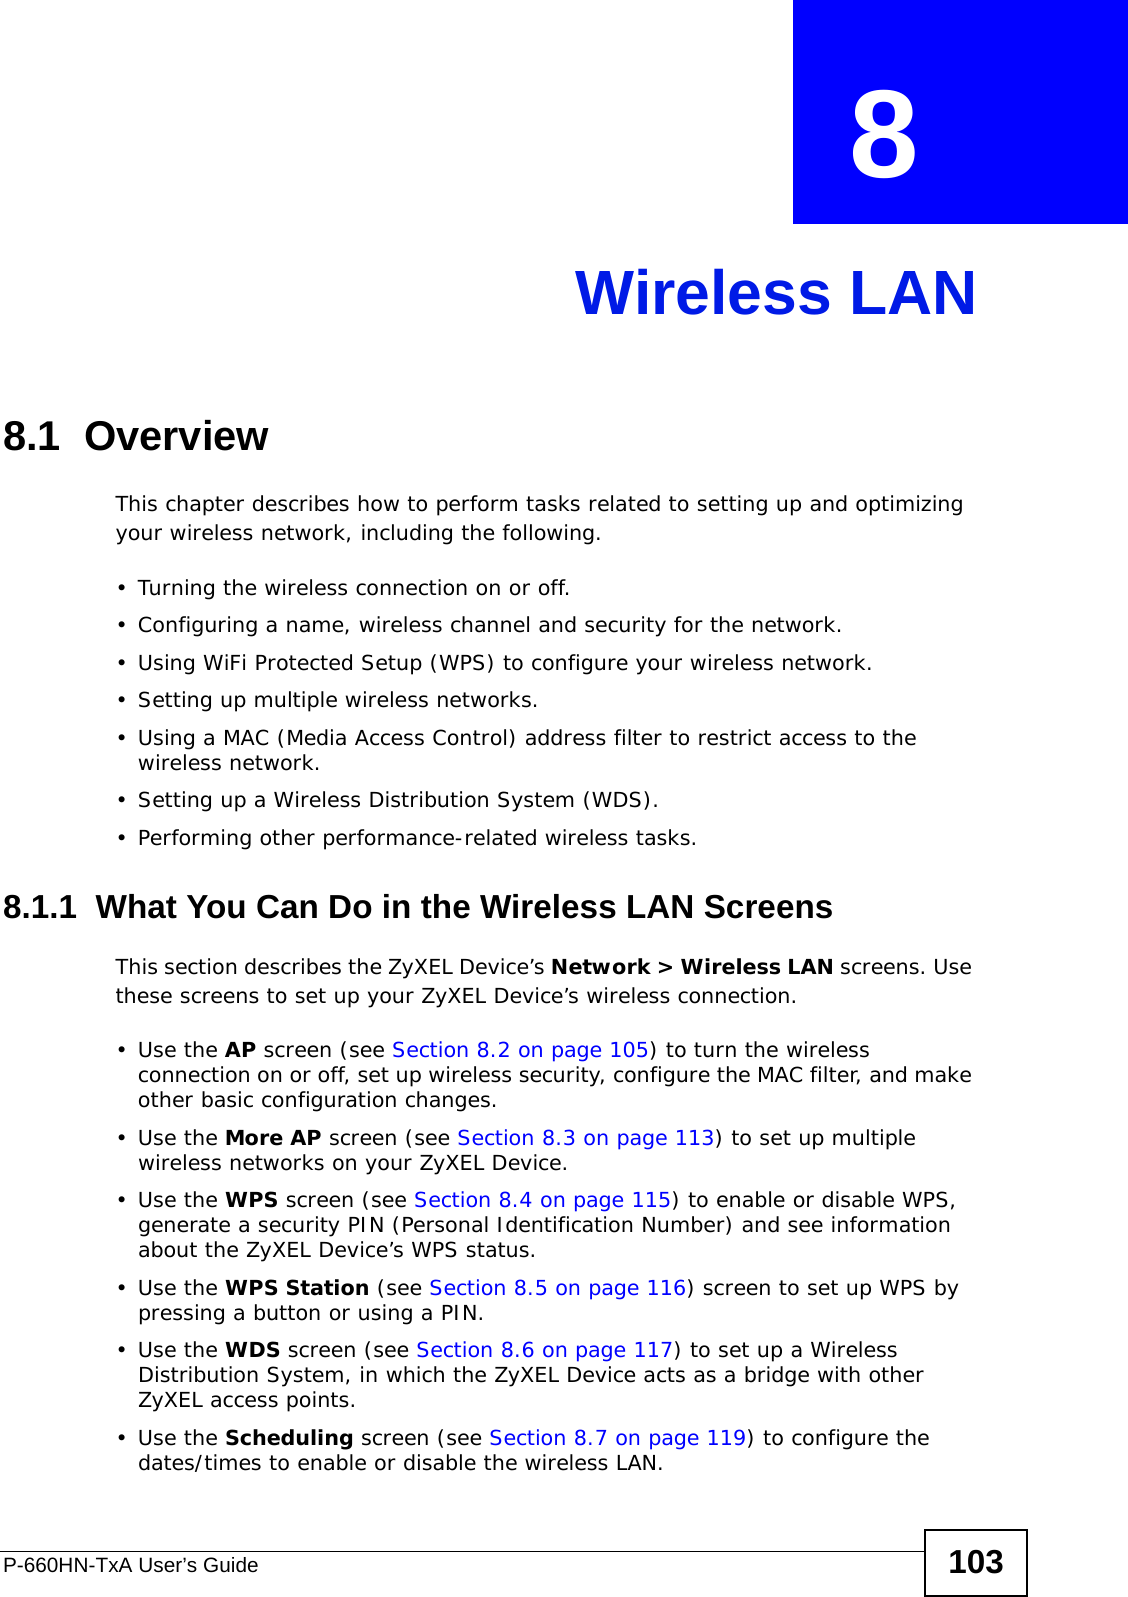 P-660HN-TxA User’s Guide 103CHAPTER  8 Wireless LAN8.1  Overview This chapter describes how to perform tasks related to setting up and optimizing your wireless network, including the following.• Turning the wireless connection on or off.• Configuring a name, wireless channel and security for the network.• Using WiFi Protected Setup (WPS) to configure your wireless network.• Setting up multiple wireless networks.• Using a MAC (Media Access Control) address filter to restrict access to the wireless network.• Setting up a Wireless Distribution System (WDS).• Performing other performance-related wireless tasks.8.1.1  What You Can Do in the Wireless LAN ScreensThis section describes the ZyXEL Device’s Network &gt; Wireless LAN screens. Use these screens to set up your ZyXEL Device’s wireless connection.•Use the AP screen (see Section 8.2 on page 105) to turn the wireless connection on or off, set up wireless security, configure the MAC filter, and make other basic configuration changes.•Use the More AP screen (see Section 8.3 on page 113) to set up multiple wireless networks on your ZyXEL Device.•Use the WPS screen (see Section 8.4 on page 115) to enable or disable WPS, generate a security PIN (Personal Identification Number) and see information about the ZyXEL Device’s WPS status.•Use the WPS Station (see Section 8.5 on page 116) screen to set up WPS by pressing a button or using a PIN.•Use the WDS screen (see Section 8.6 on page 117) to set up a Wireless Distribution System, in which the ZyXEL Device acts as a bridge with other ZyXEL access points.•Use the Scheduling screen (see Section 8.7 on page 119) to configure the dates/times to enable or disable the wireless LAN.